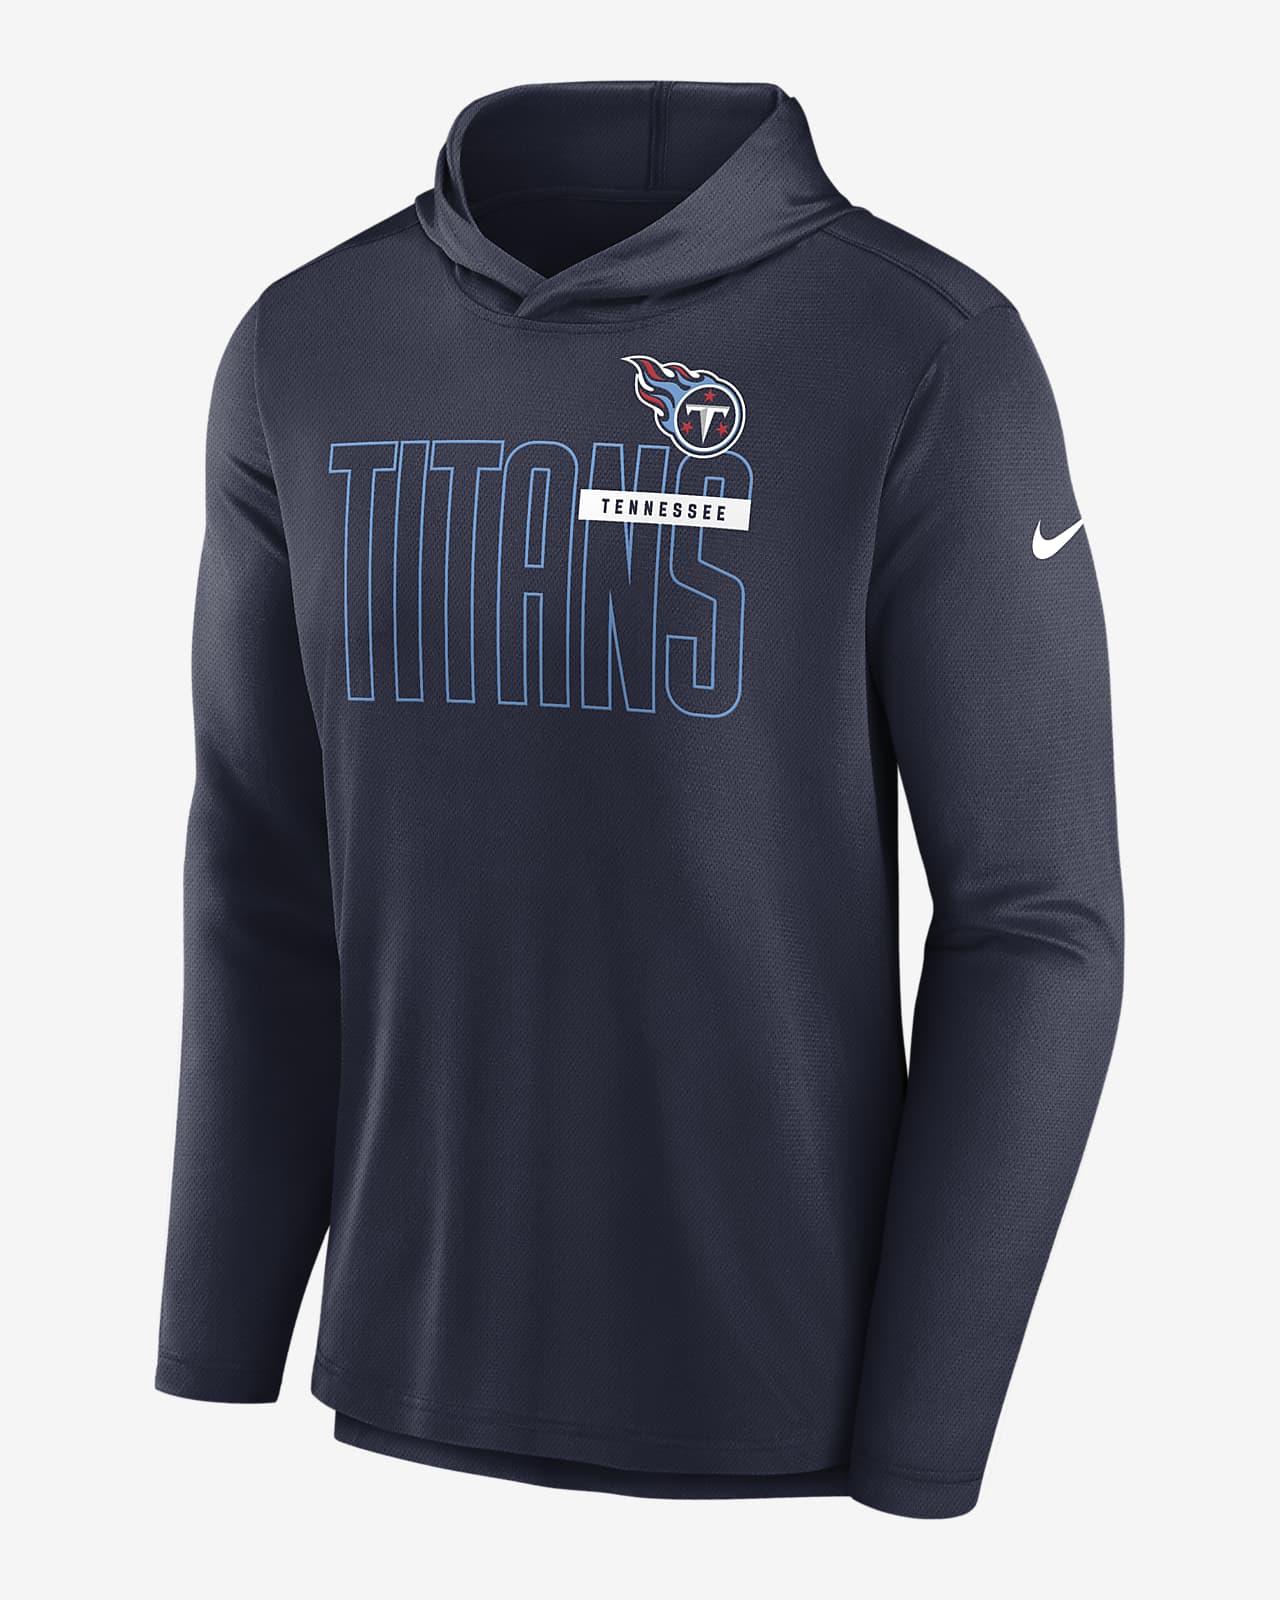 Men's Nike Navy Tennessee Titans Lightweight Performance Hooded Long Sleeve T-Shirt Size: Small